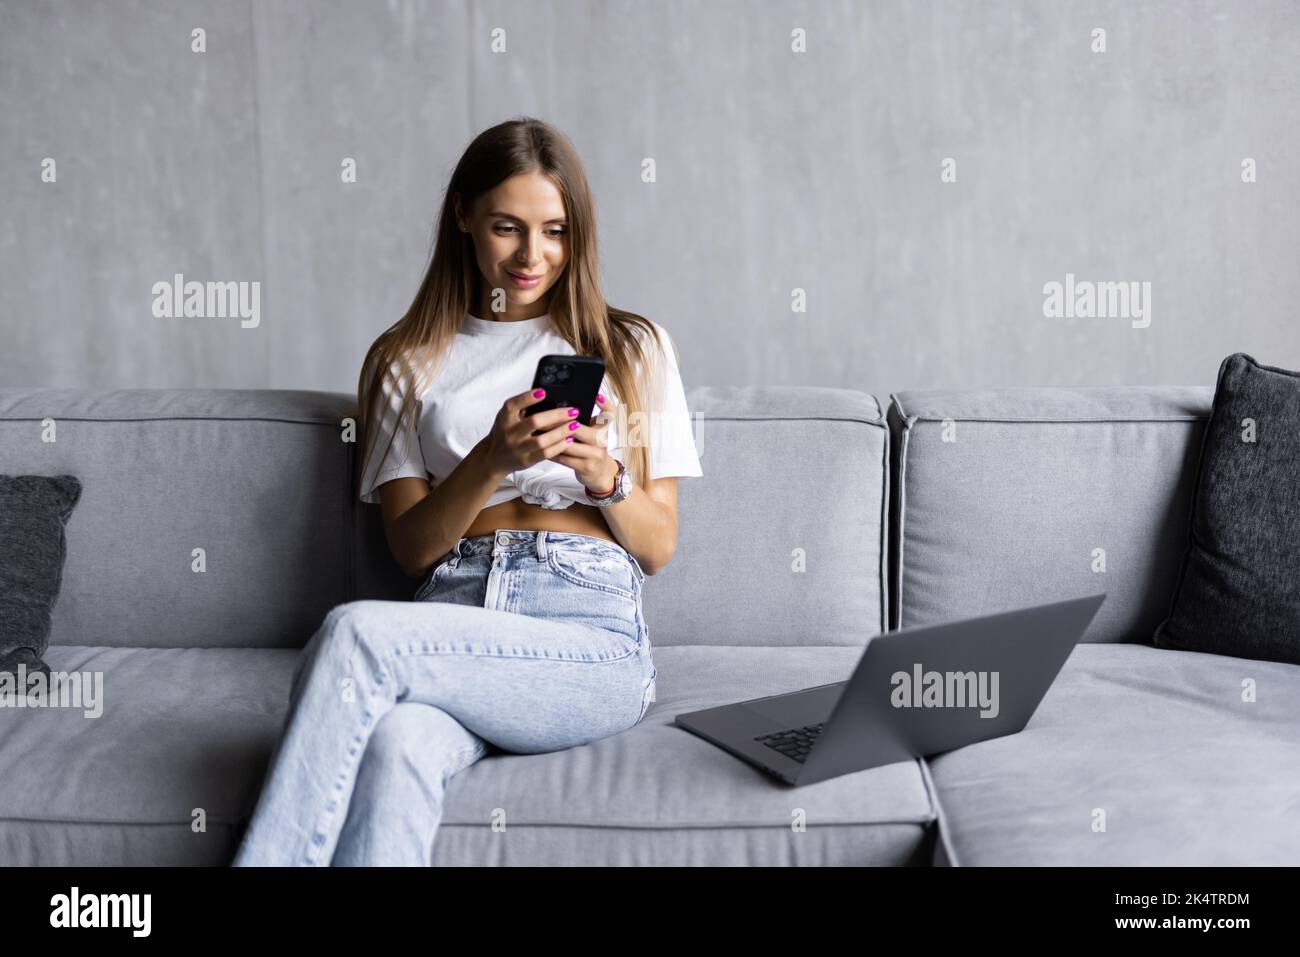 Beautiful smiling young brunette woman relaxing on a couch at home, using mobile phone Stock Photo